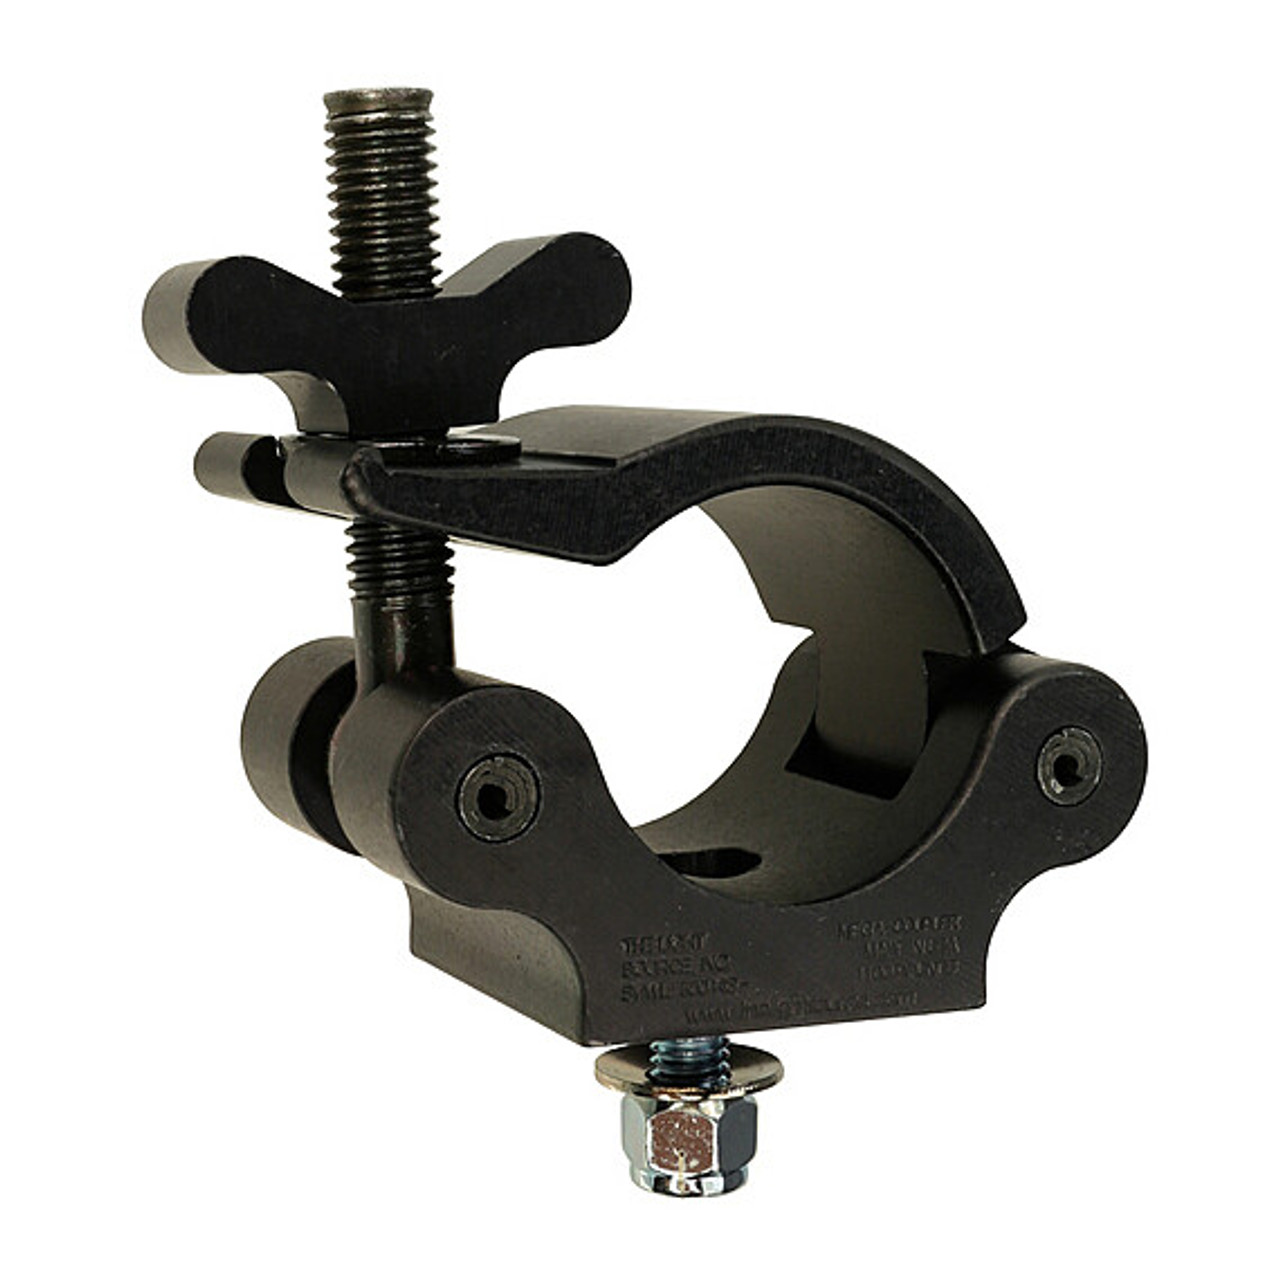 The Light Source MLB3/8-SW Mega-Coupler With 3/8" Hex Head Cap Screw & Steel Wing Nut Black Finish